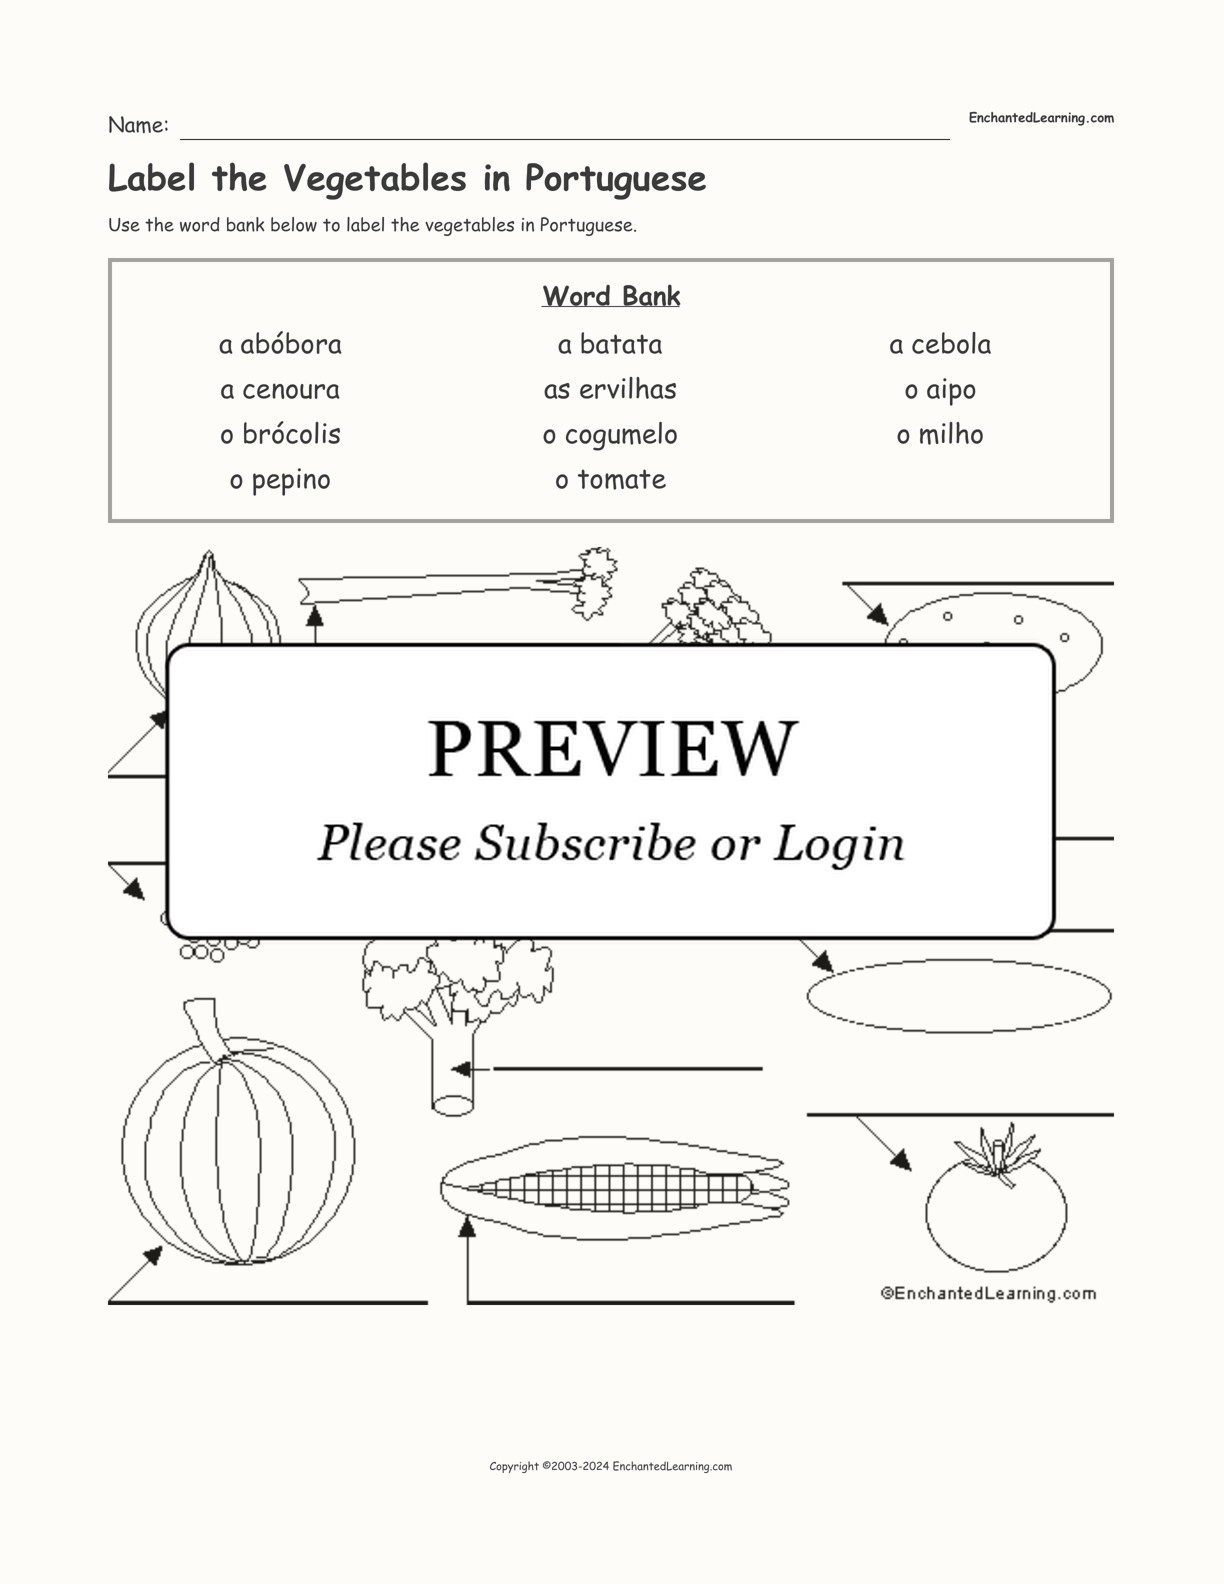 Label the Vegetables in Portuguese interactive worksheet page 1